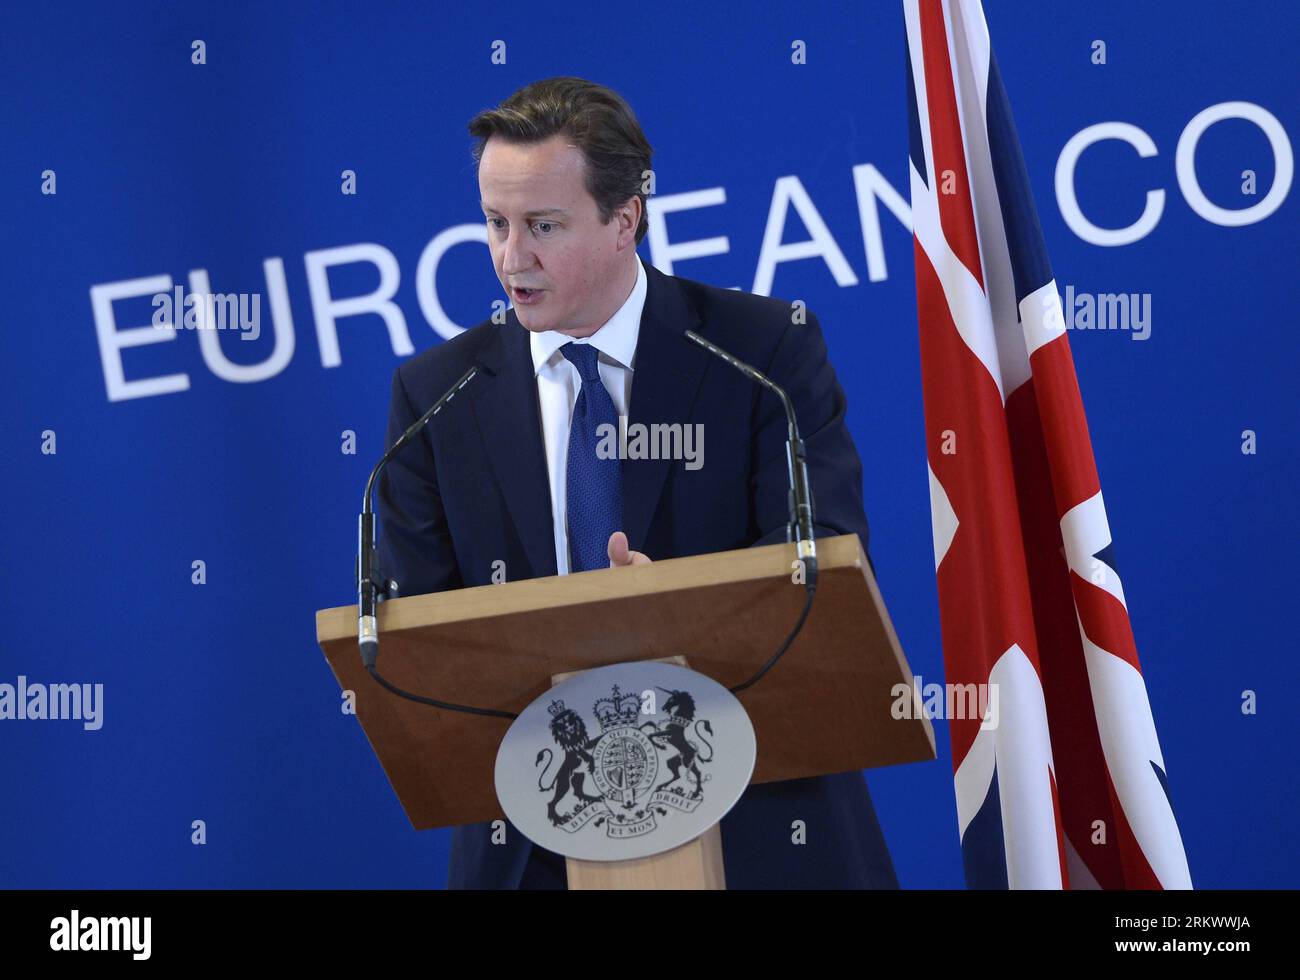 Bildnummer: 58757818  Datum: 23.11.2012  Copyright: imago/Xinhua (121123) -- BRUSSELS, Nov. 23, 2012 (Xinhua) -- British Prime Minister David Cameron attends a press conference at the end of an extraordinary EU summit in Brussels, capital of Belgium, on Nov. 23, 2012. Top leaders of the European Union (EU) failed to reach an agreement on the bloc s trillion-euro budget framework for 2014-2020 at a two-day special summit in Brussels, with its negotiations postponed until early next year, President of European Council HermanxVanxRompuy said here on Friday afternoon. (Xinhua/Wu Wei)(yt) BELGIUM-E Stock Photo